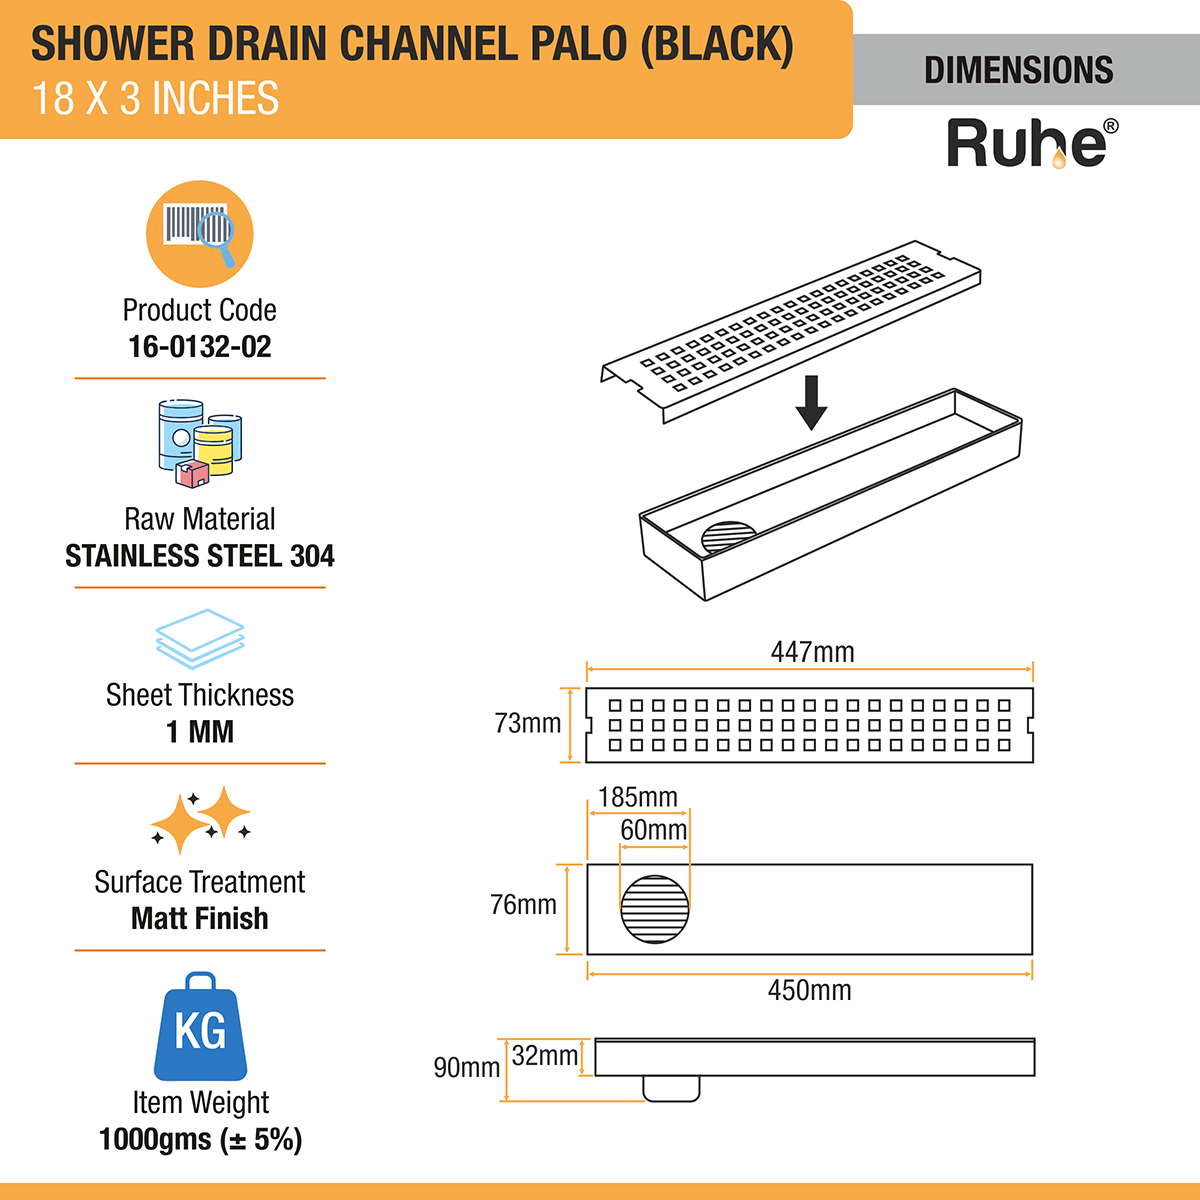 Palo Shower Drain Channel (18 x 3 Inches) Black PVD Coated dimensions and sizes